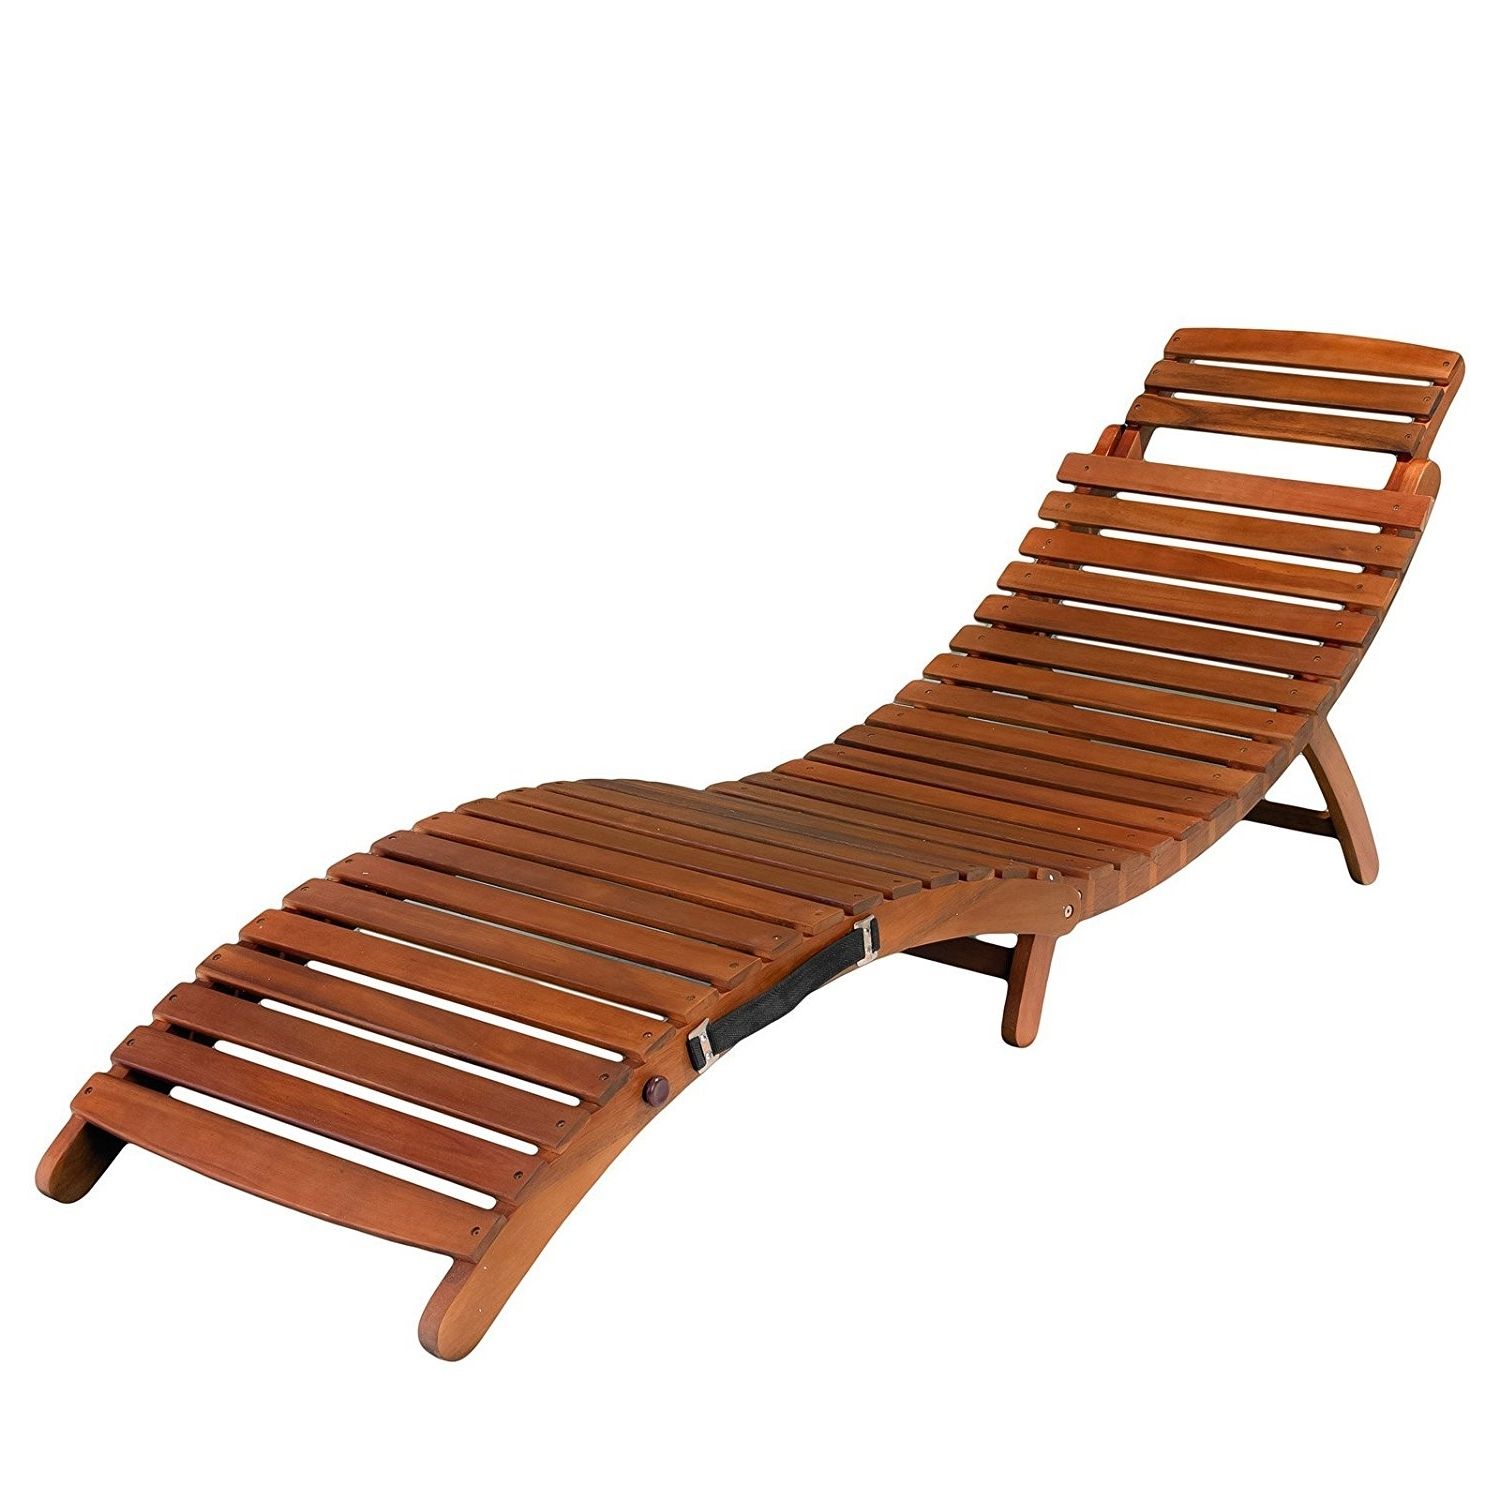 Most Current Amazon: Lahaina Outdoor Chaise Lounge: Garden & Outdoor For Chaise Lounge Chairs For Outdoors (View 3 of 15)